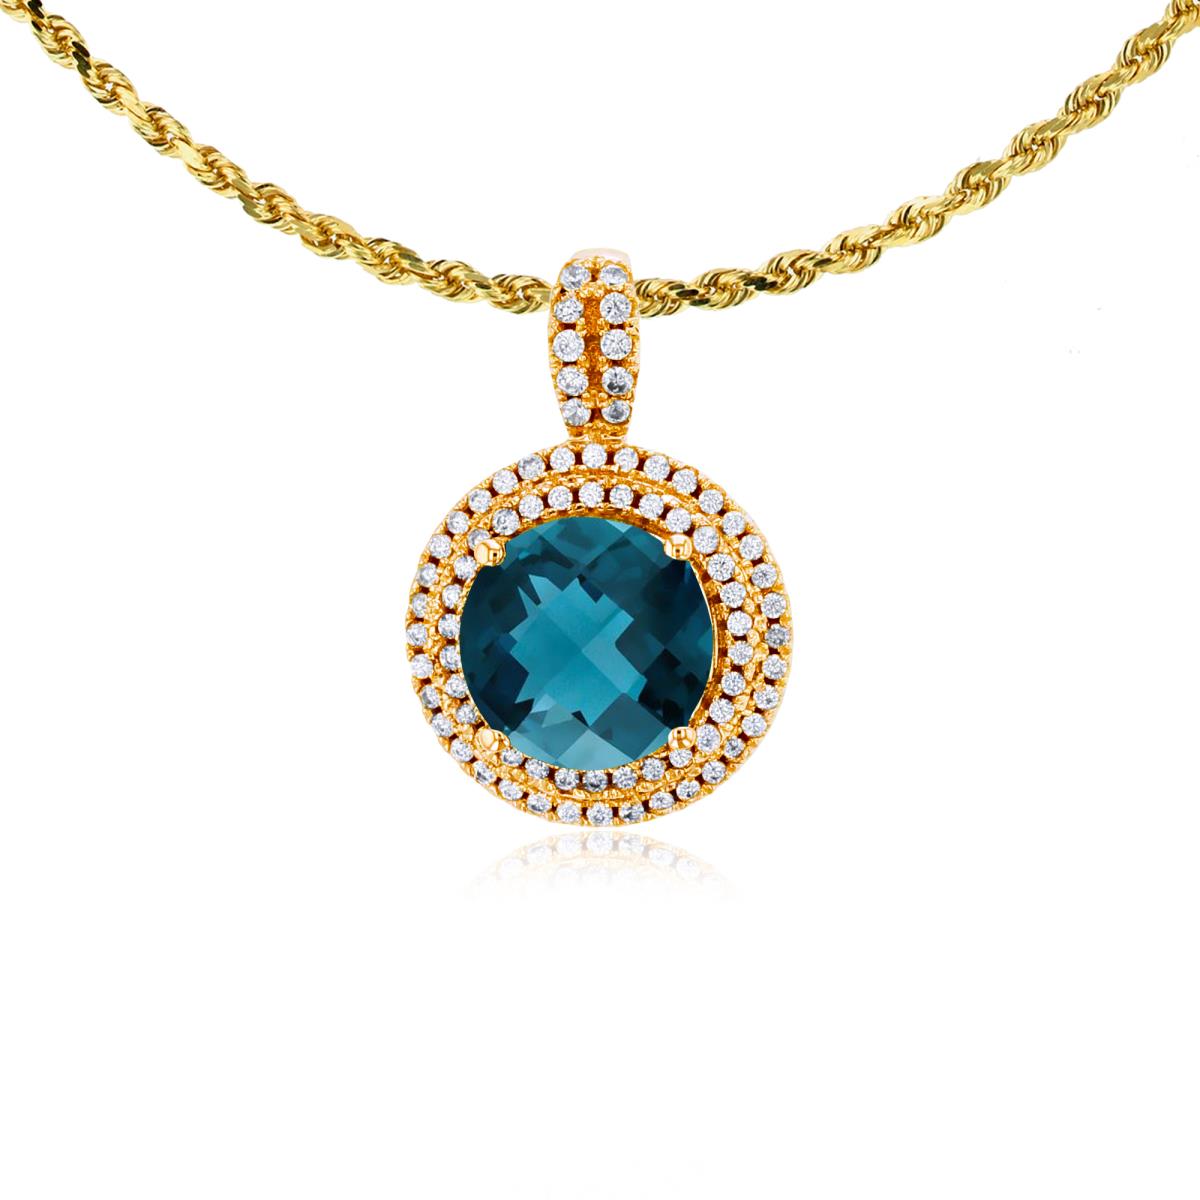 10K Yellow Gold 7mm Round London Blue Topaz & 0.25 CTTW Diamonds Double Halo 18" Rope Chain Necklace